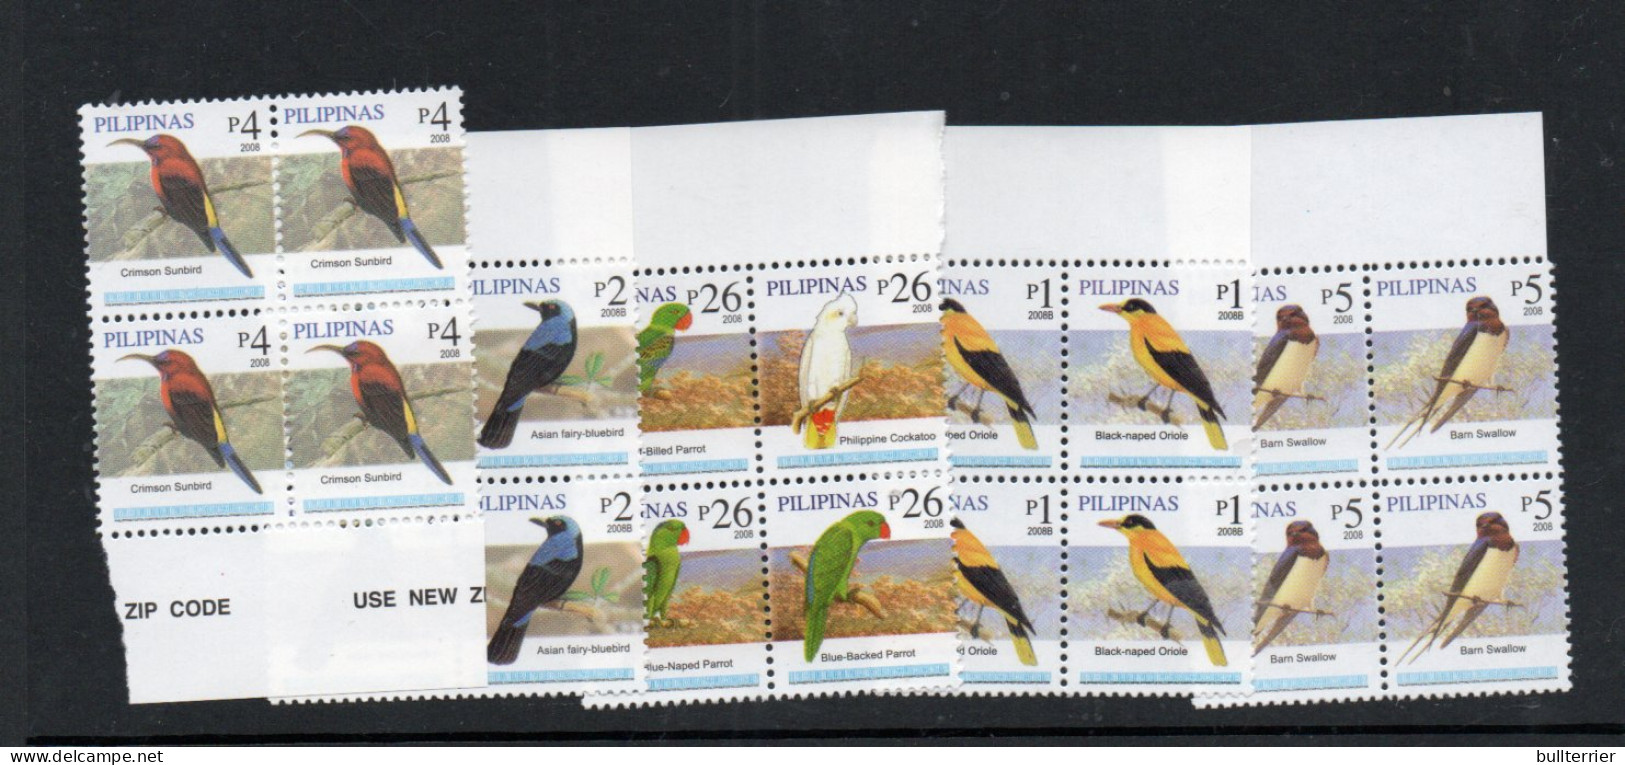 BIRDS - PHILIPPINES - 2007 - BIRDS SELECTION IN BLOCKS OF 4  MINT NEVER HINGED  - Hiboux & Chouettes